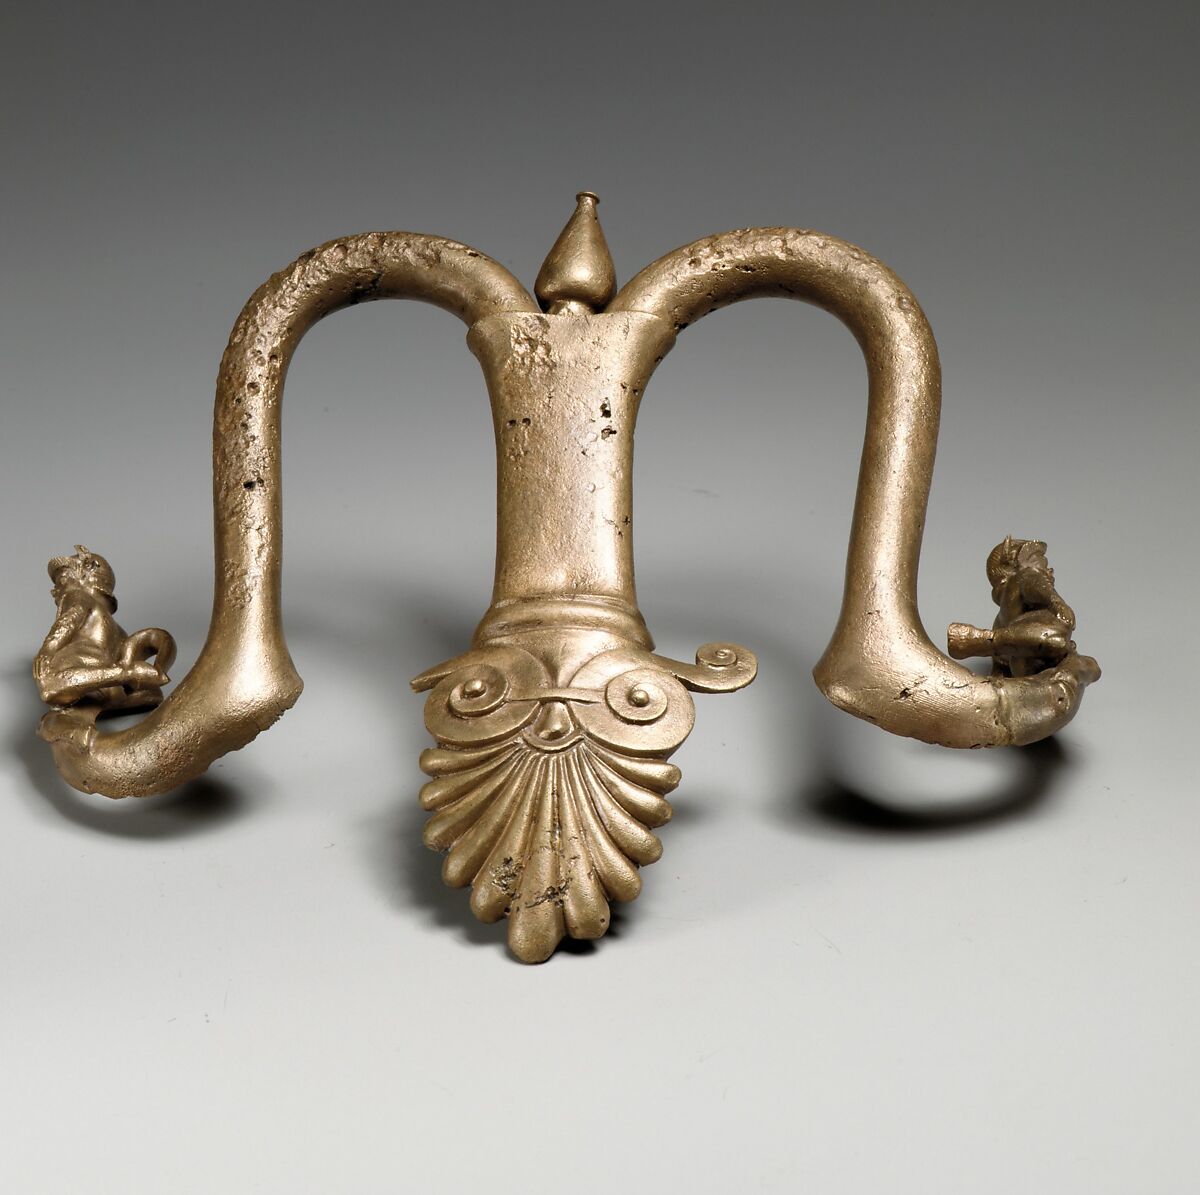 Handles and feet of a bronze louterion (basin), Bronze, Greek 